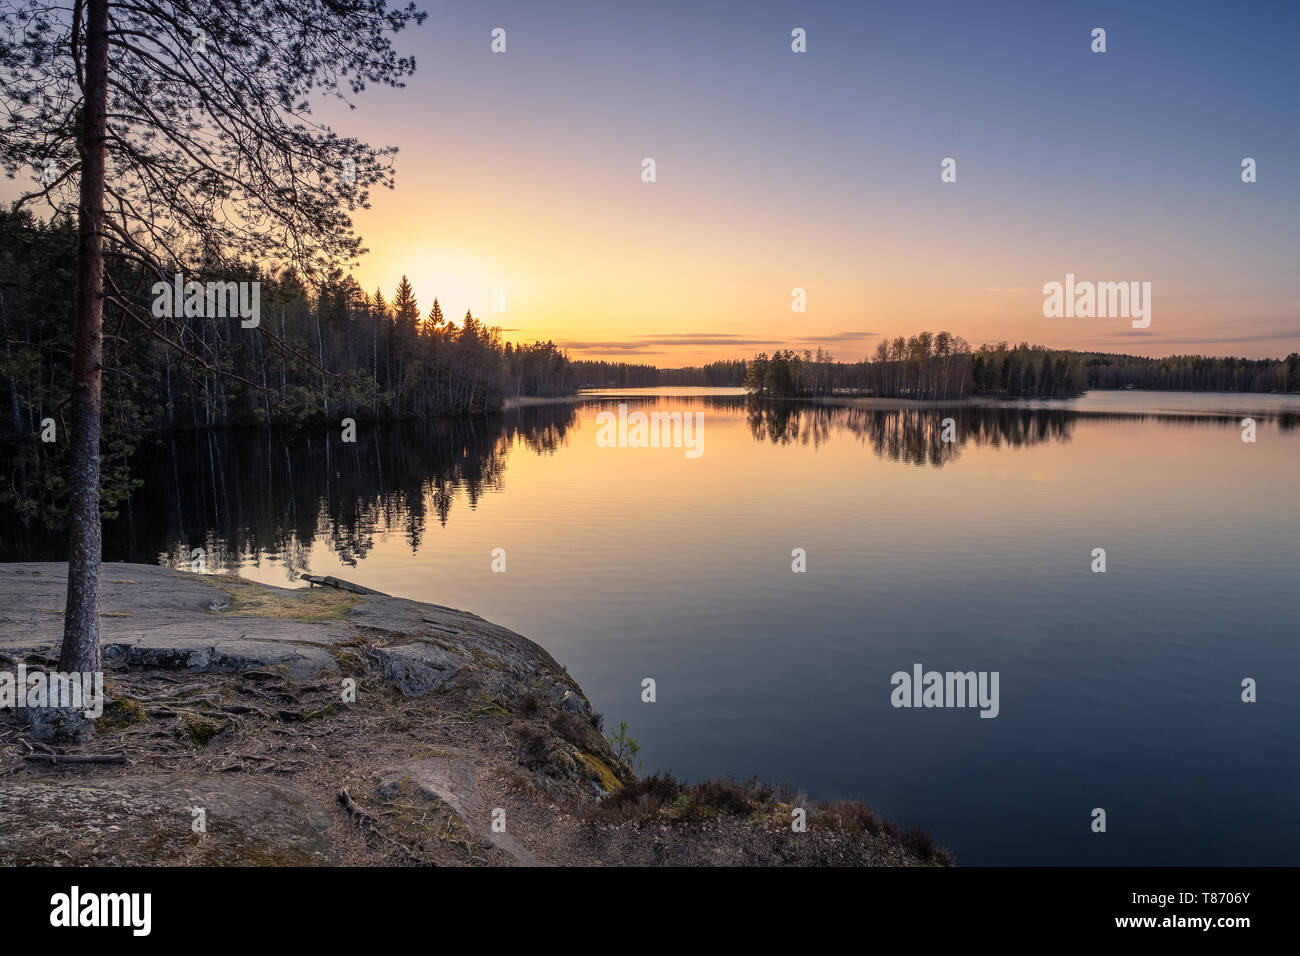 Scenic landscape with sunset, peaceful lake and tree roots at calm spring evening in Finland Stock Photo